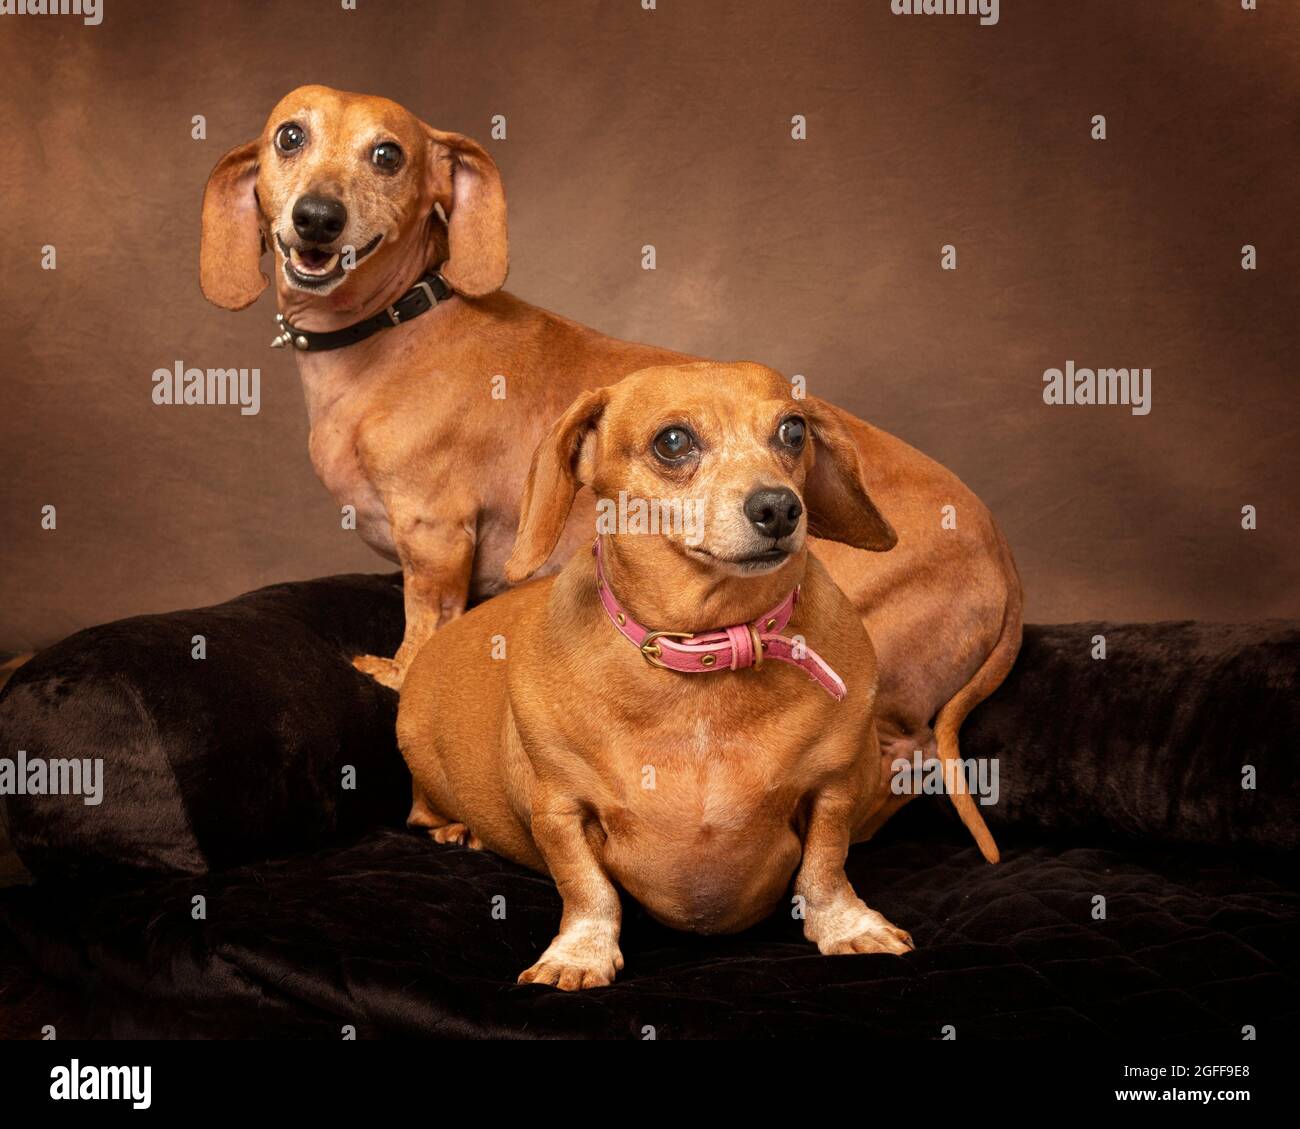 Horizontal shot of two older smooth red dachshunds showing some white against a textured brown background with copyspace. Stock Photo